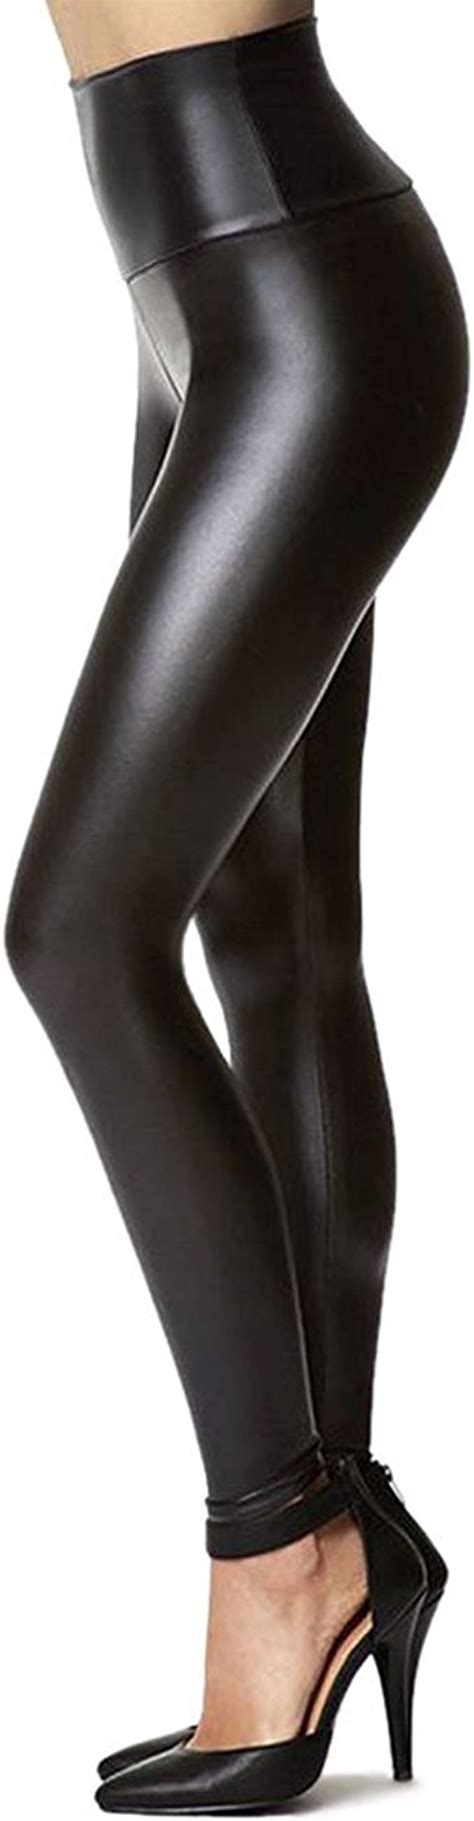 Women S Stretchy Faux Leather Leggings Pants Sexy Black High Waisted